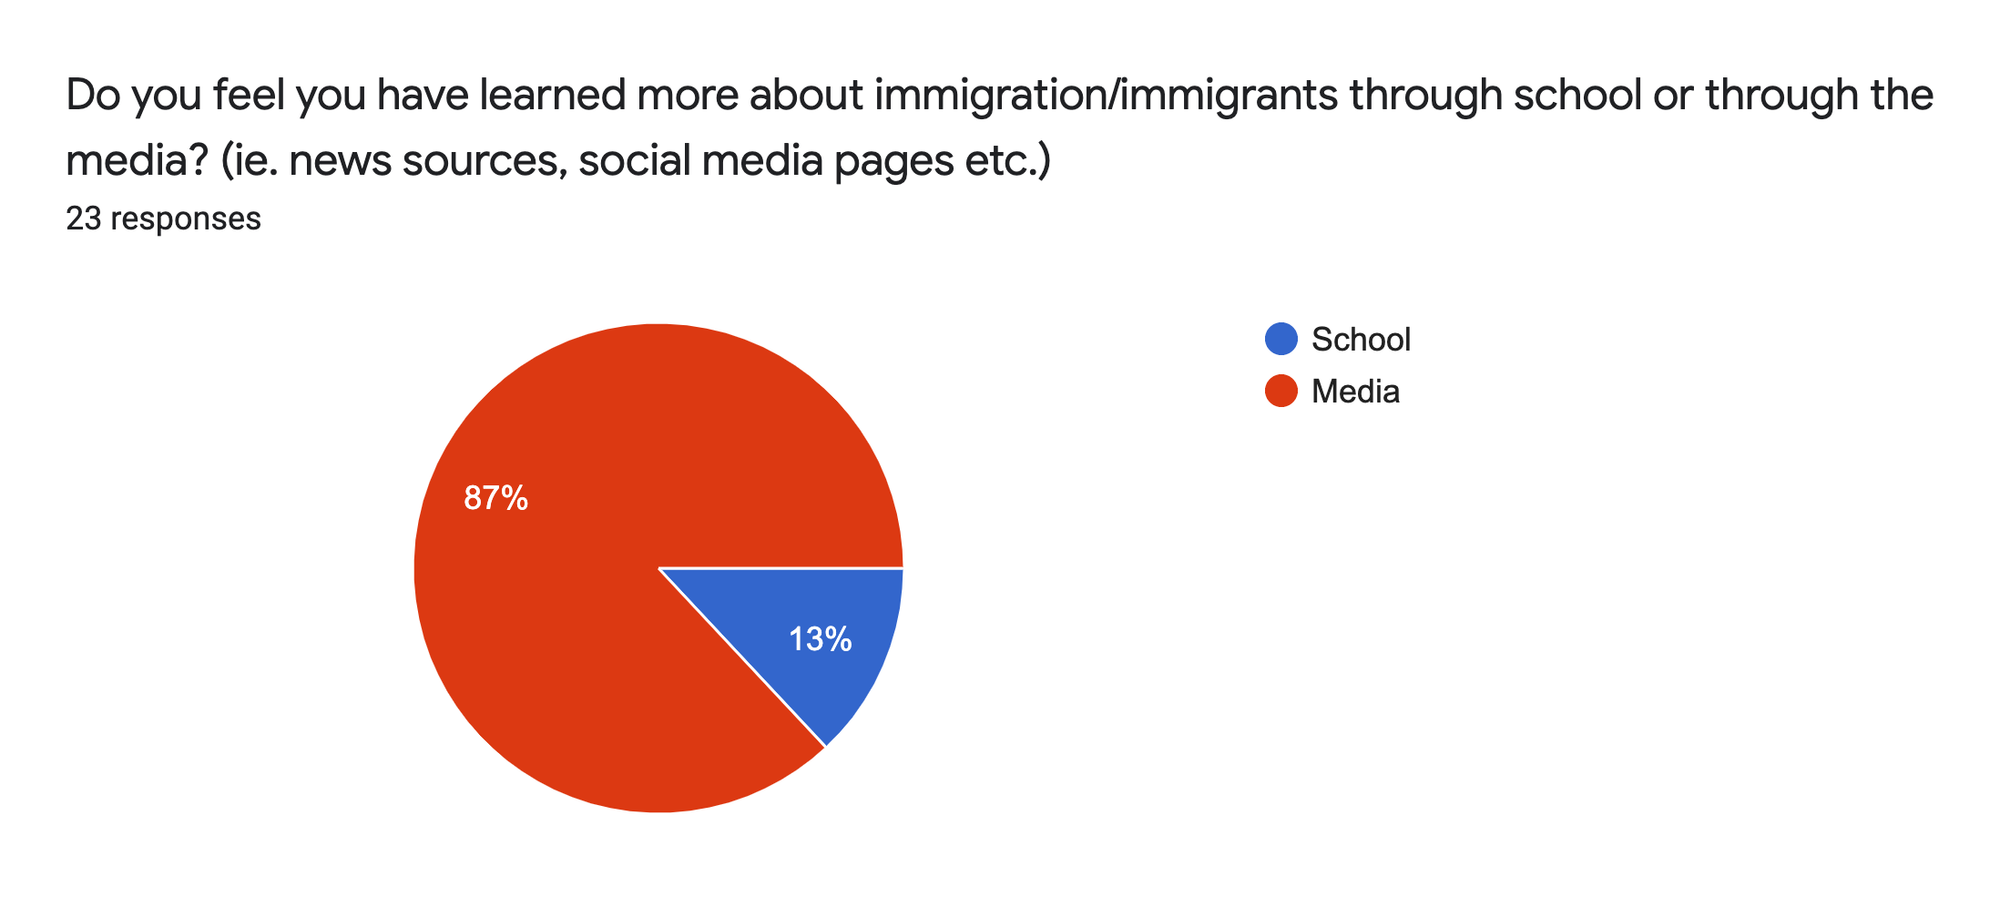 Forms response chart. Question title: Do you feel you have learned more about immigration/immigrants through school or through the media? (ie. news sources, social media pages etc.). Number of responses: 23 responses.